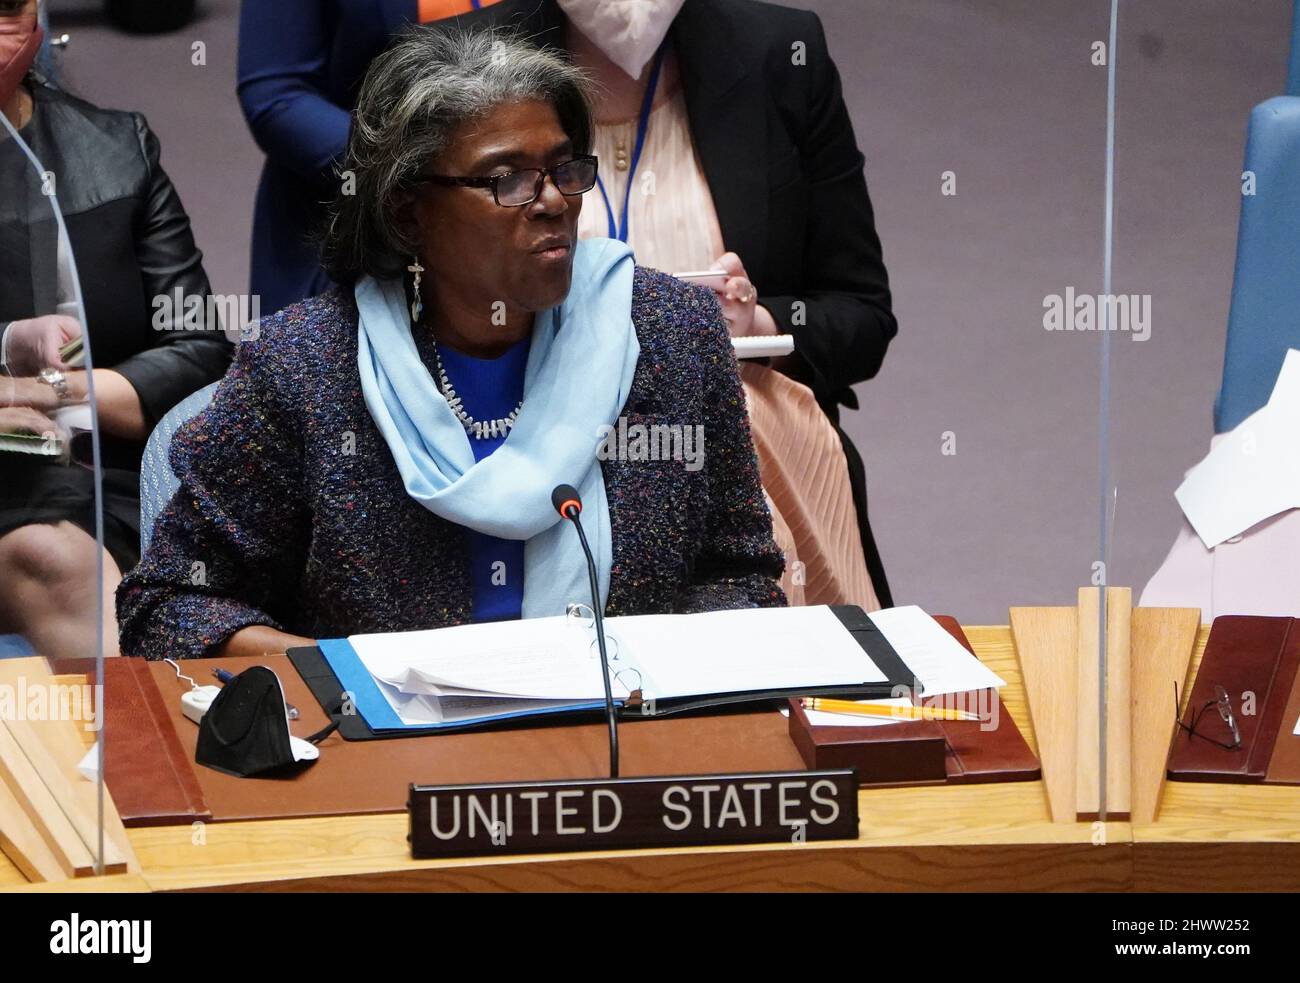 U.S. Ambassador to the U.N. Linda Thomas-Greenfield speaks during a meeting of the United Nations Security Council on Threats to International Peace and Security, following Russia's invasion of Ukraine, in New York City, U.S., March 7, 2022. REUTERS/Carlo Allegri Stock Photo